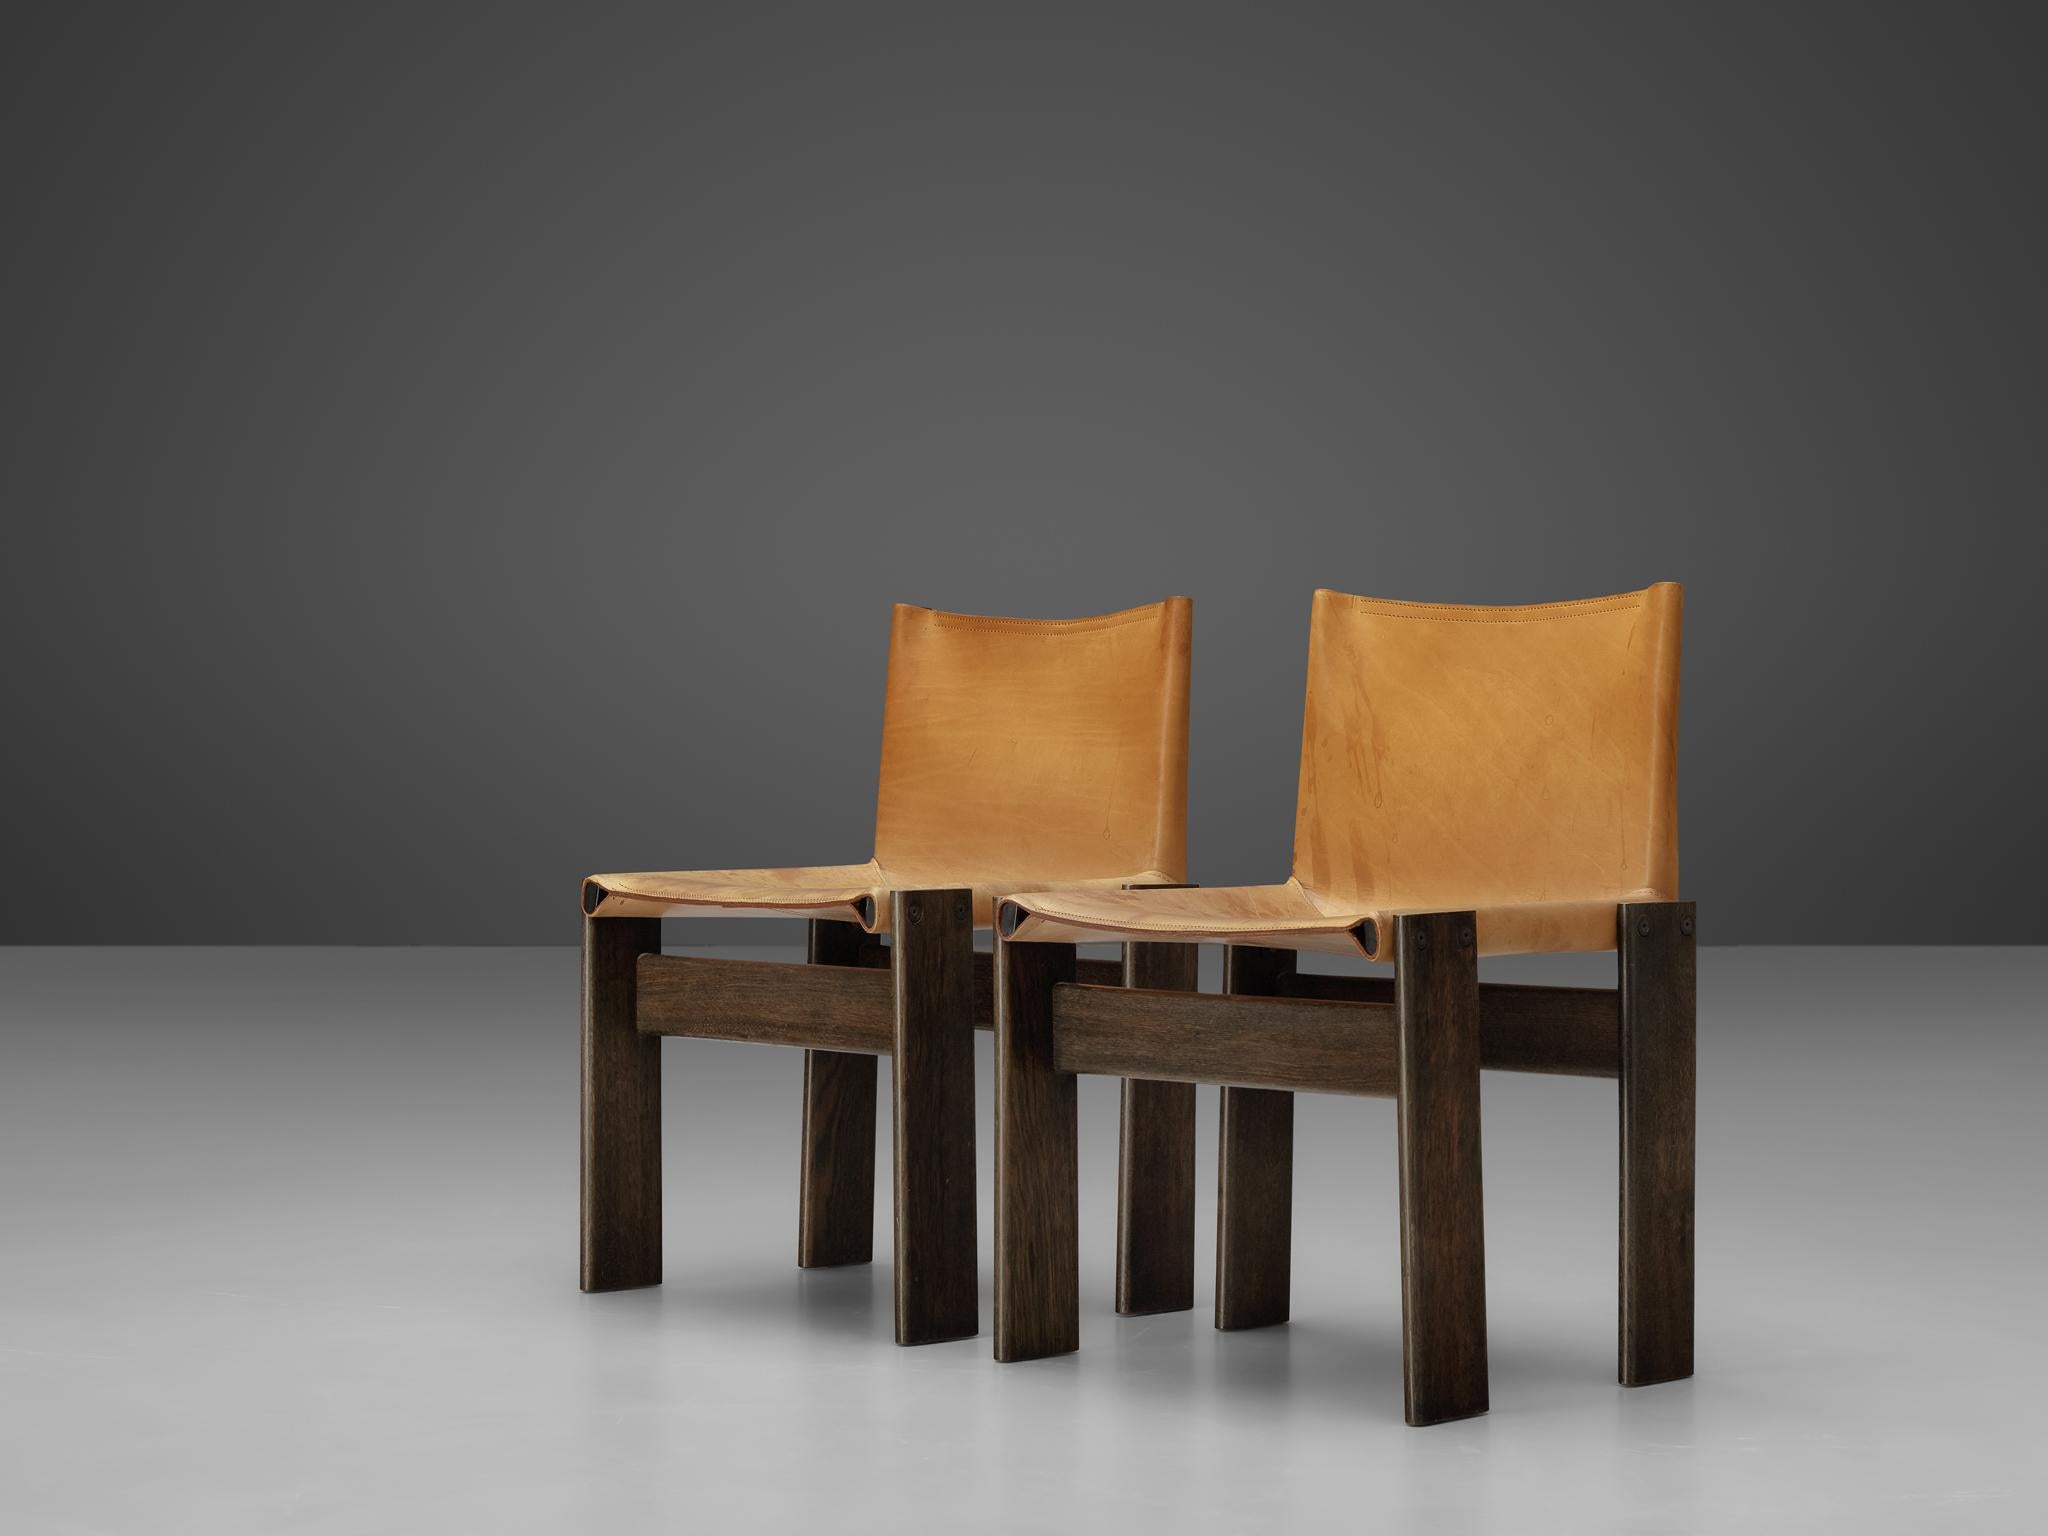 Afra & Tobia Scarpa 'Monk' Chairs in Cognac Leather 7